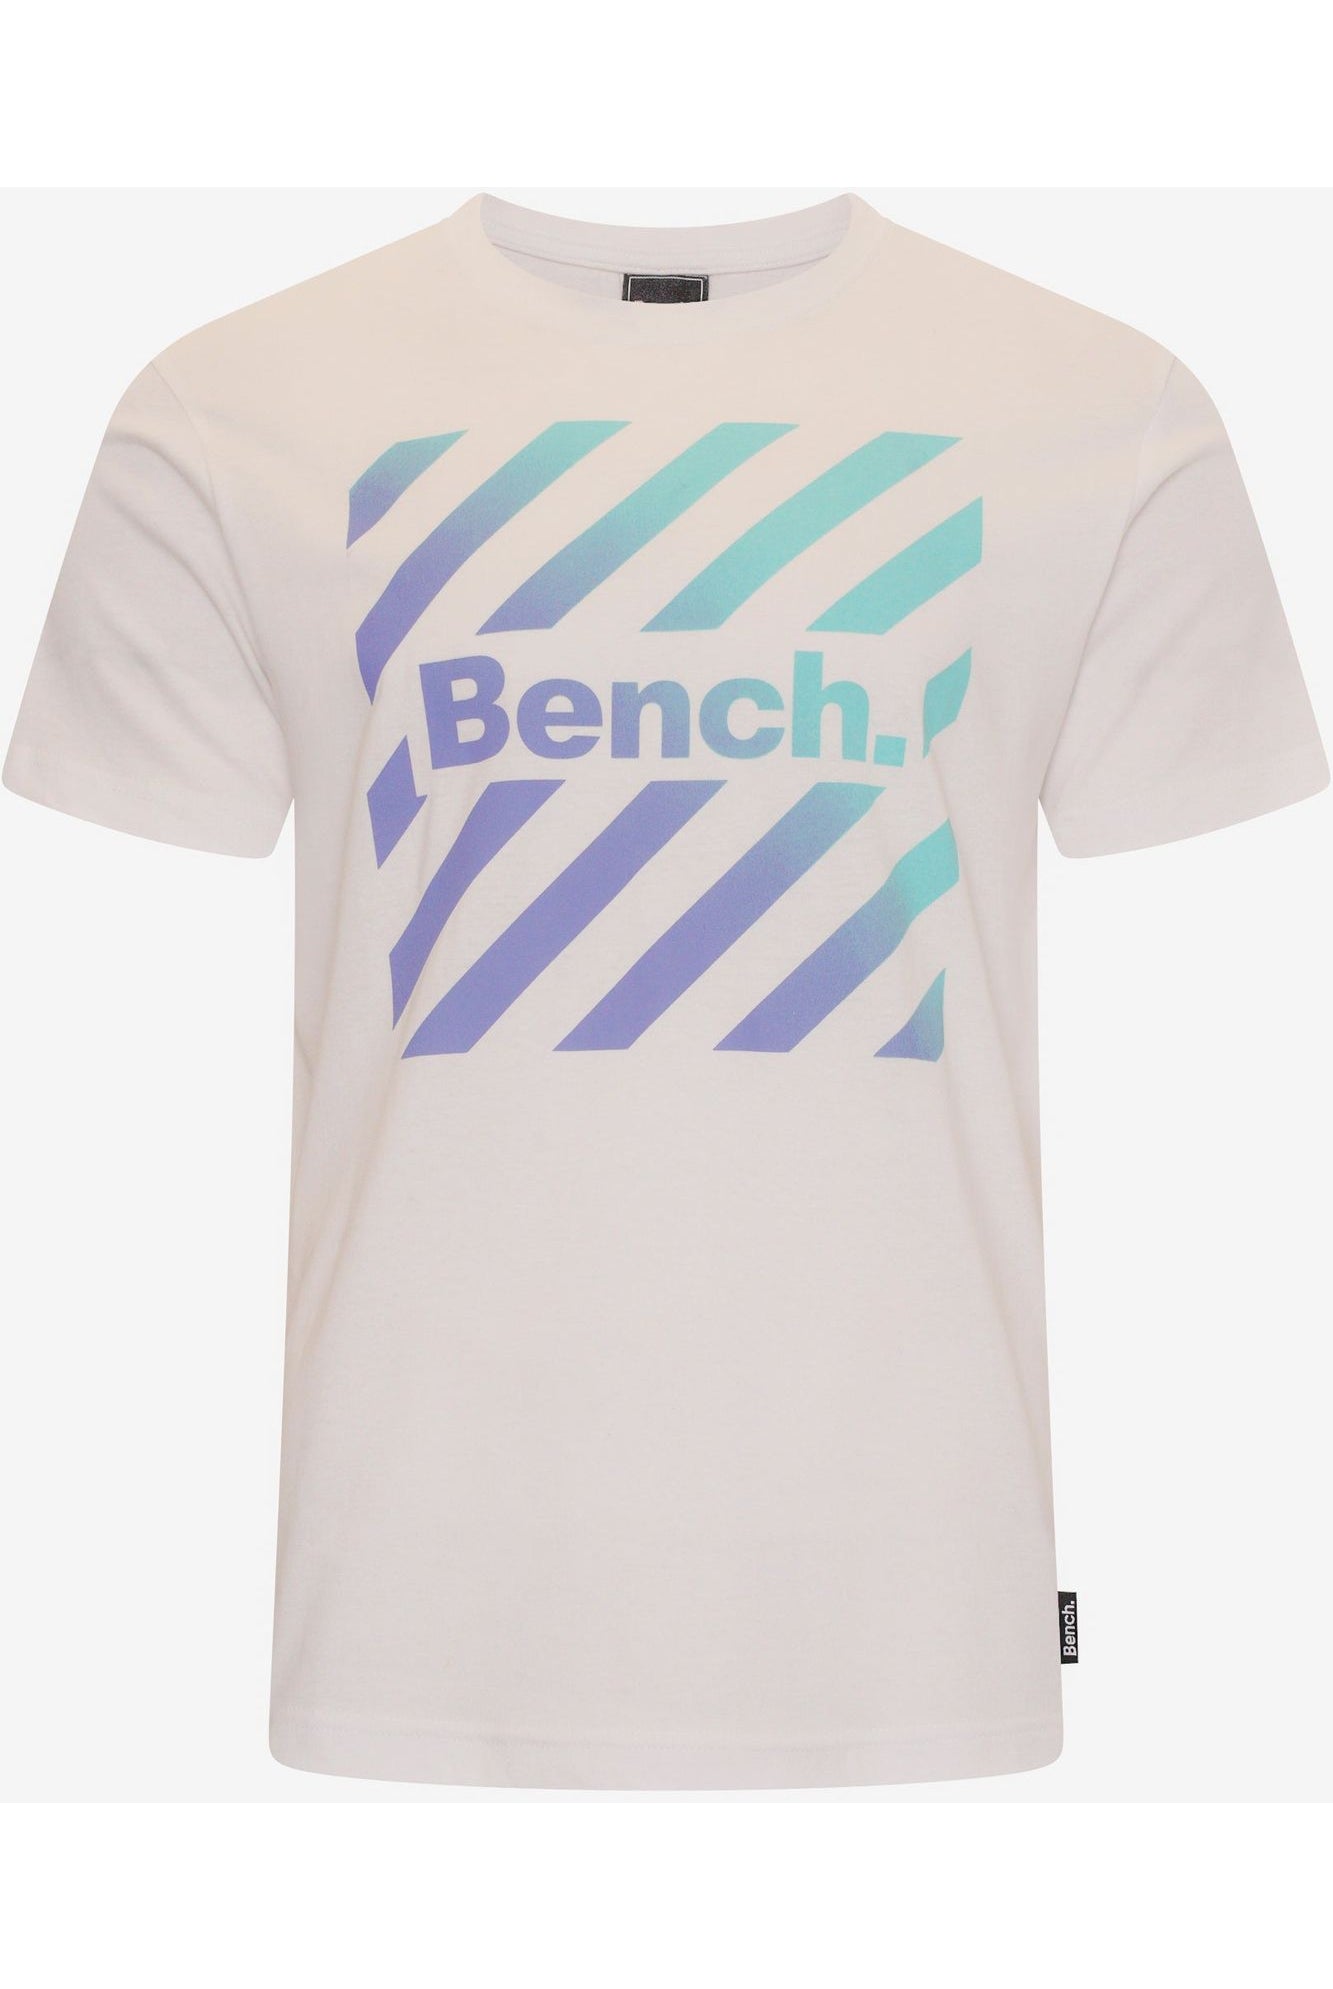 Mens 'LISHMAN' 5 Pack T-Shirts - ASSORTED - Shop at www.Bench.co.uk #LoveMyHood